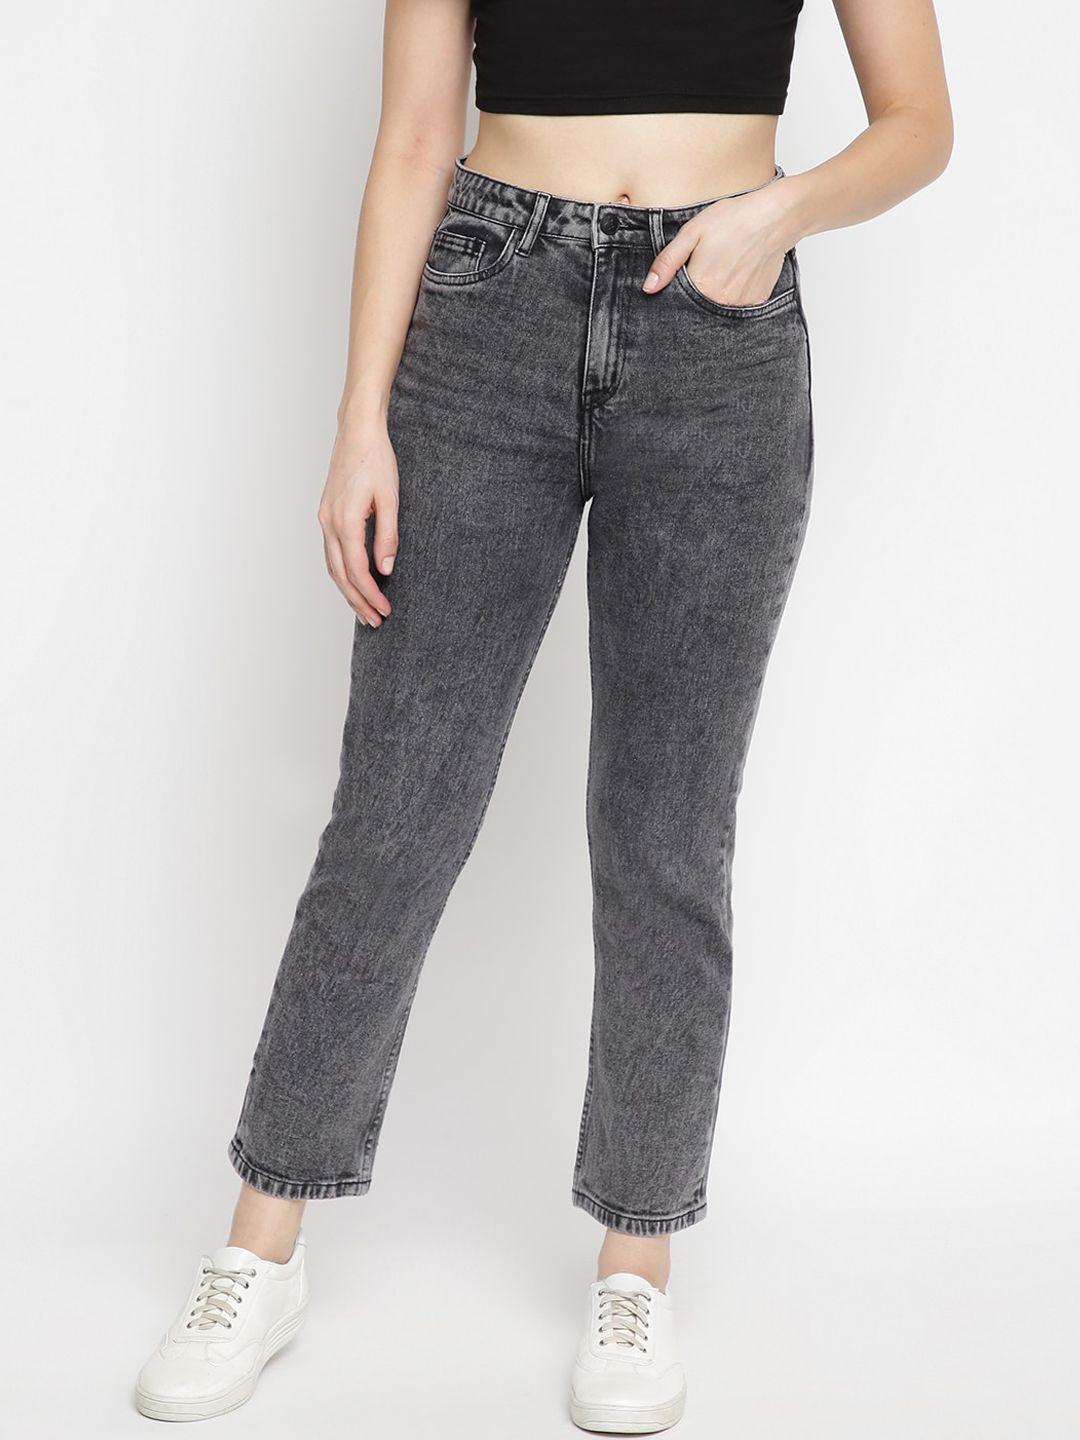 tales & stories women charcoal grey heavy fade cropped jeans